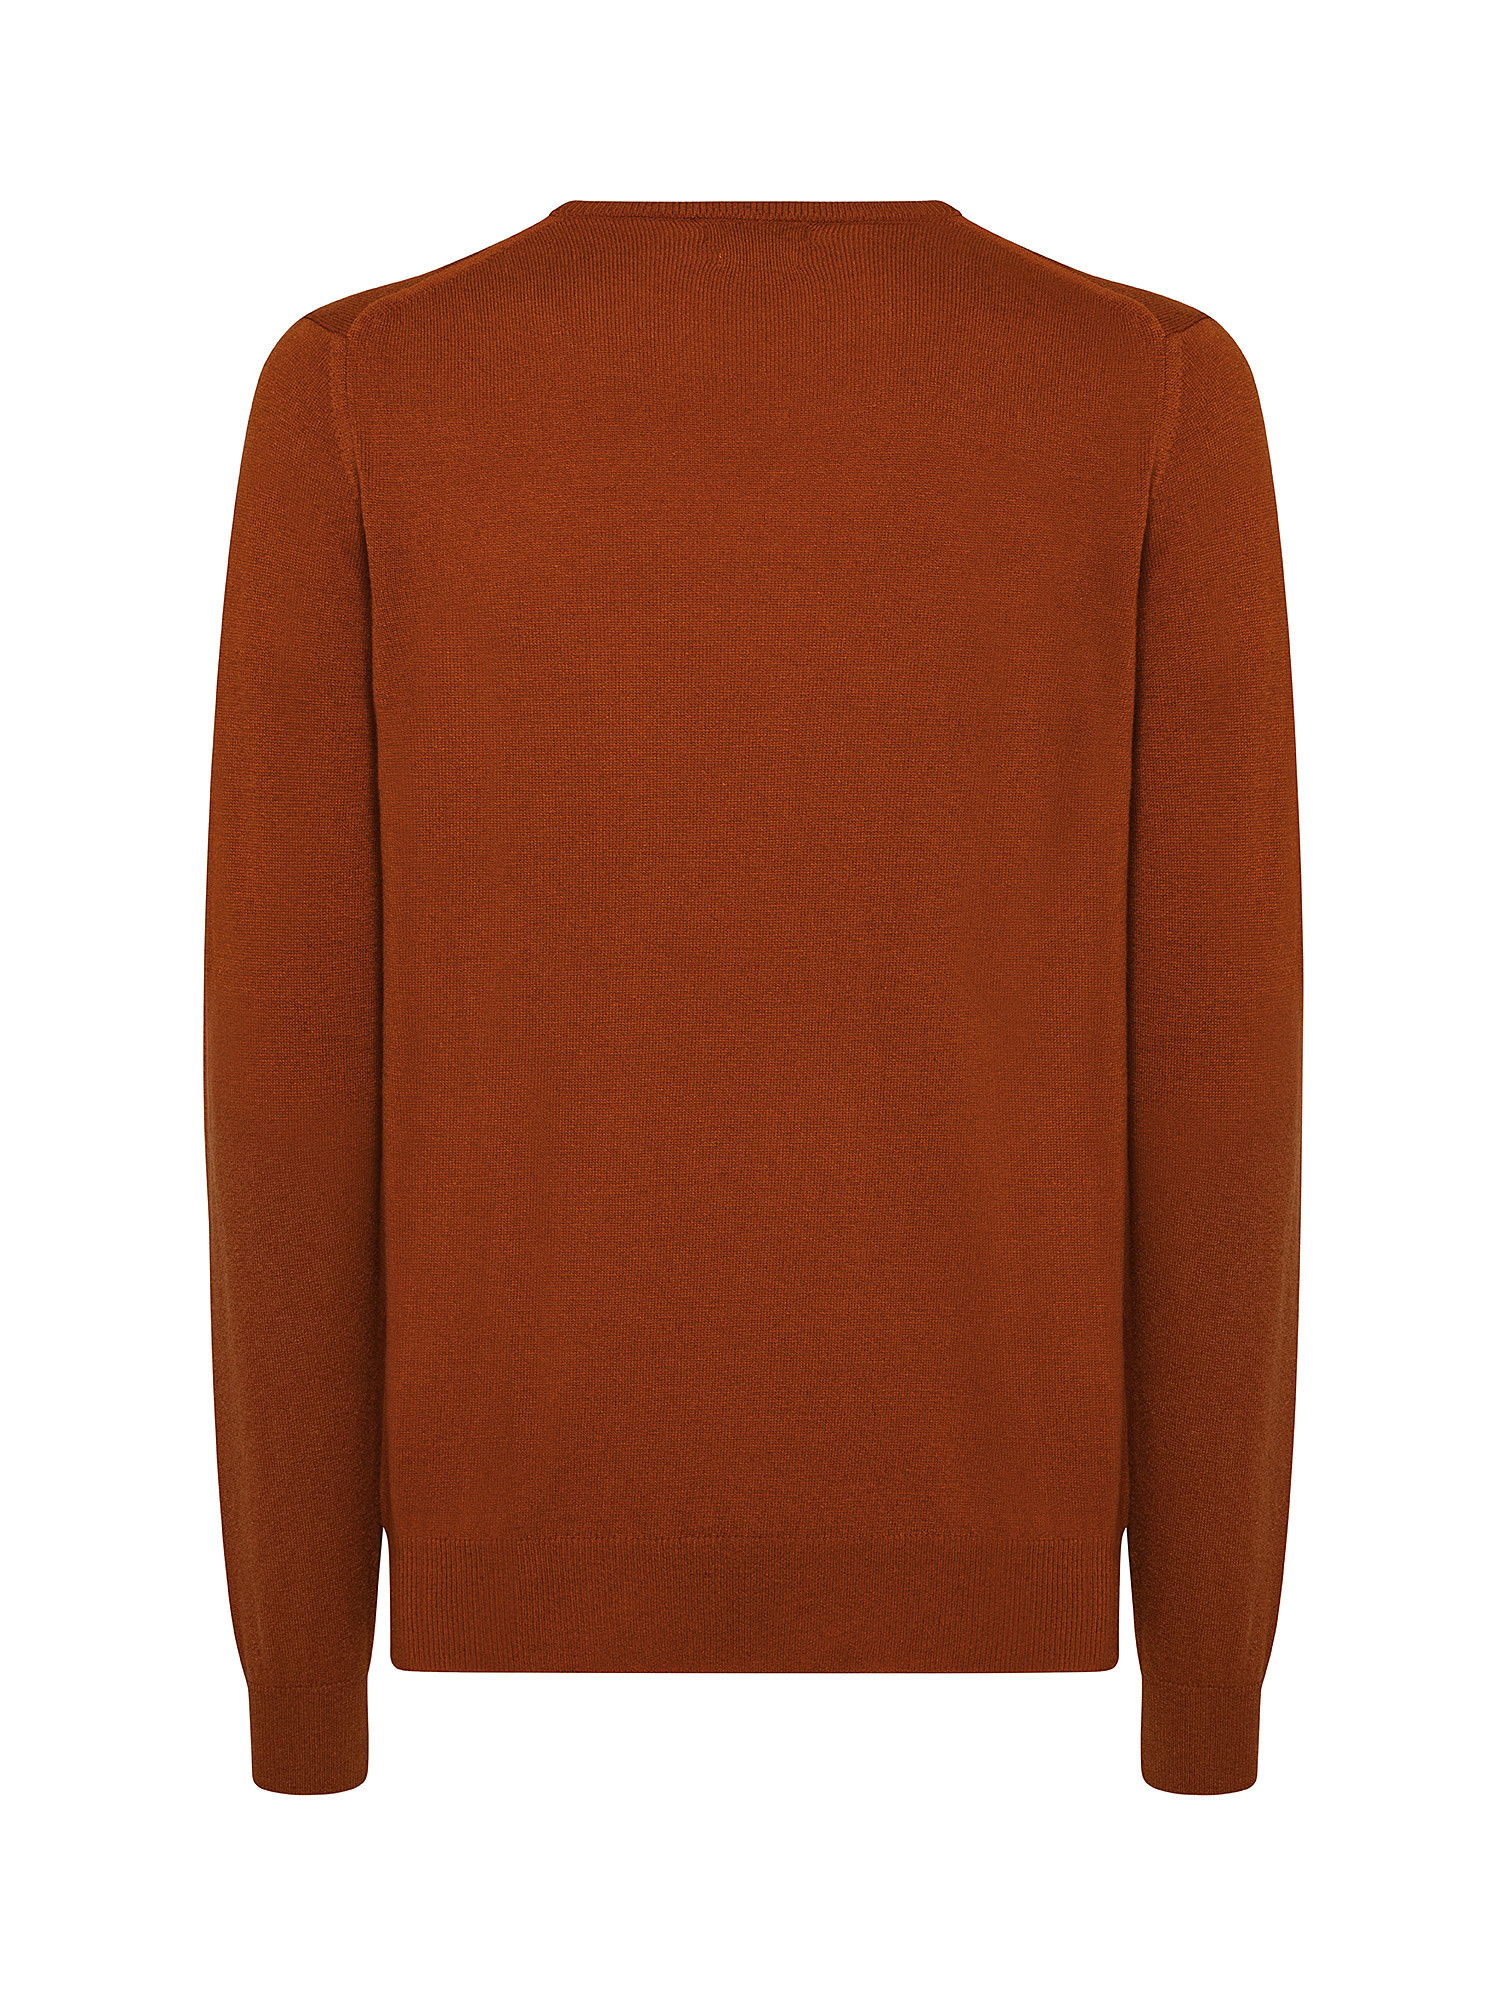 Cashmere Blend crewneck sweater with noble fibers, Copper Brown, large image number 1